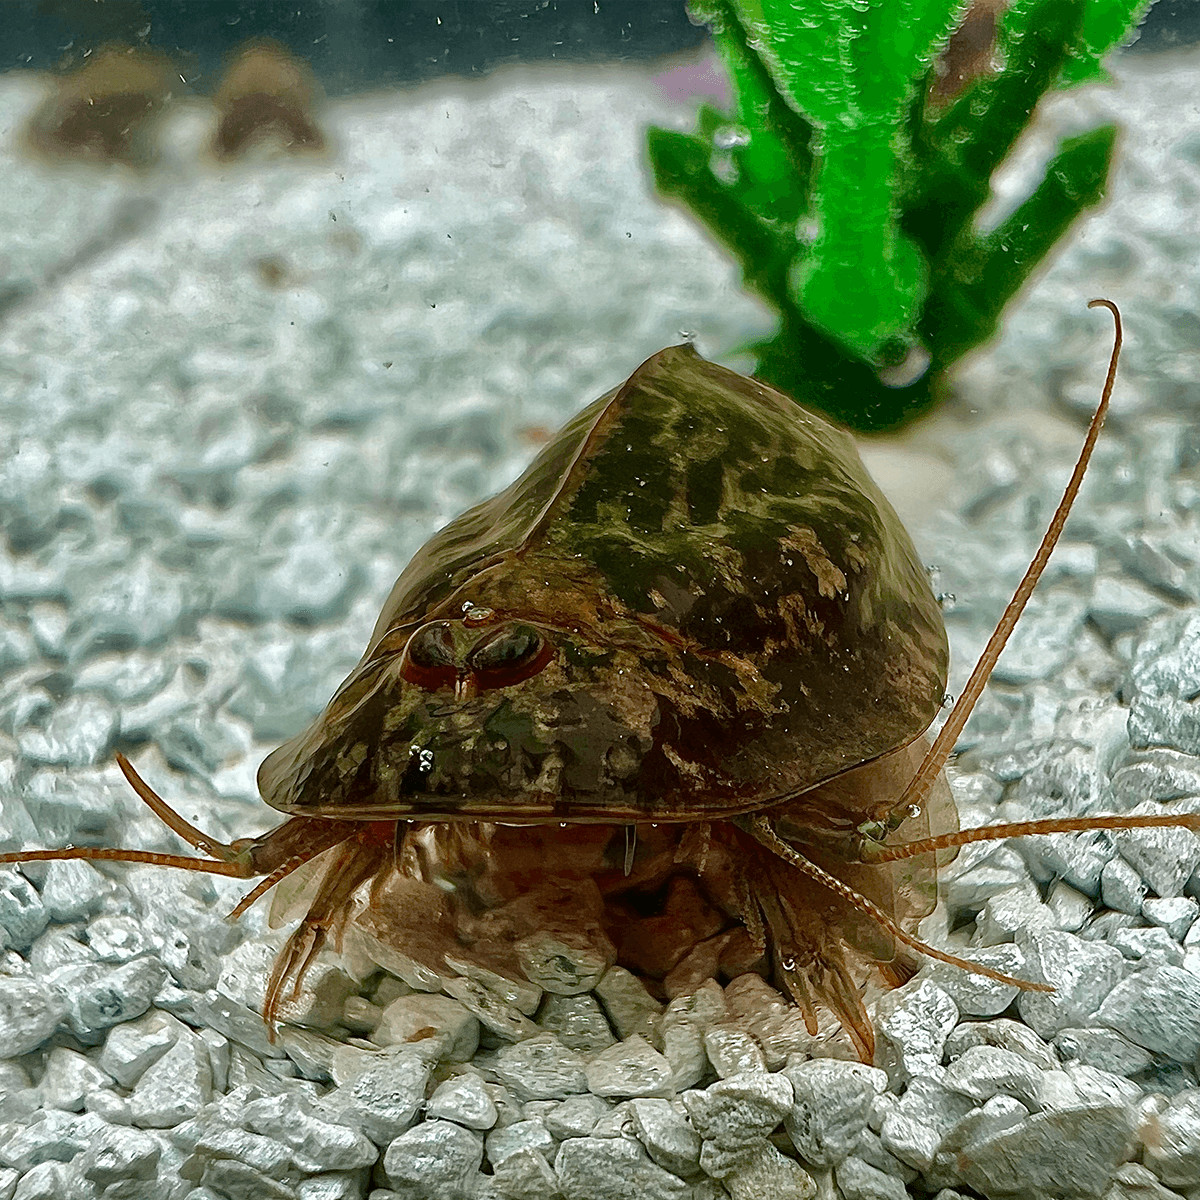 Triops Cancriformis Germany from Germany